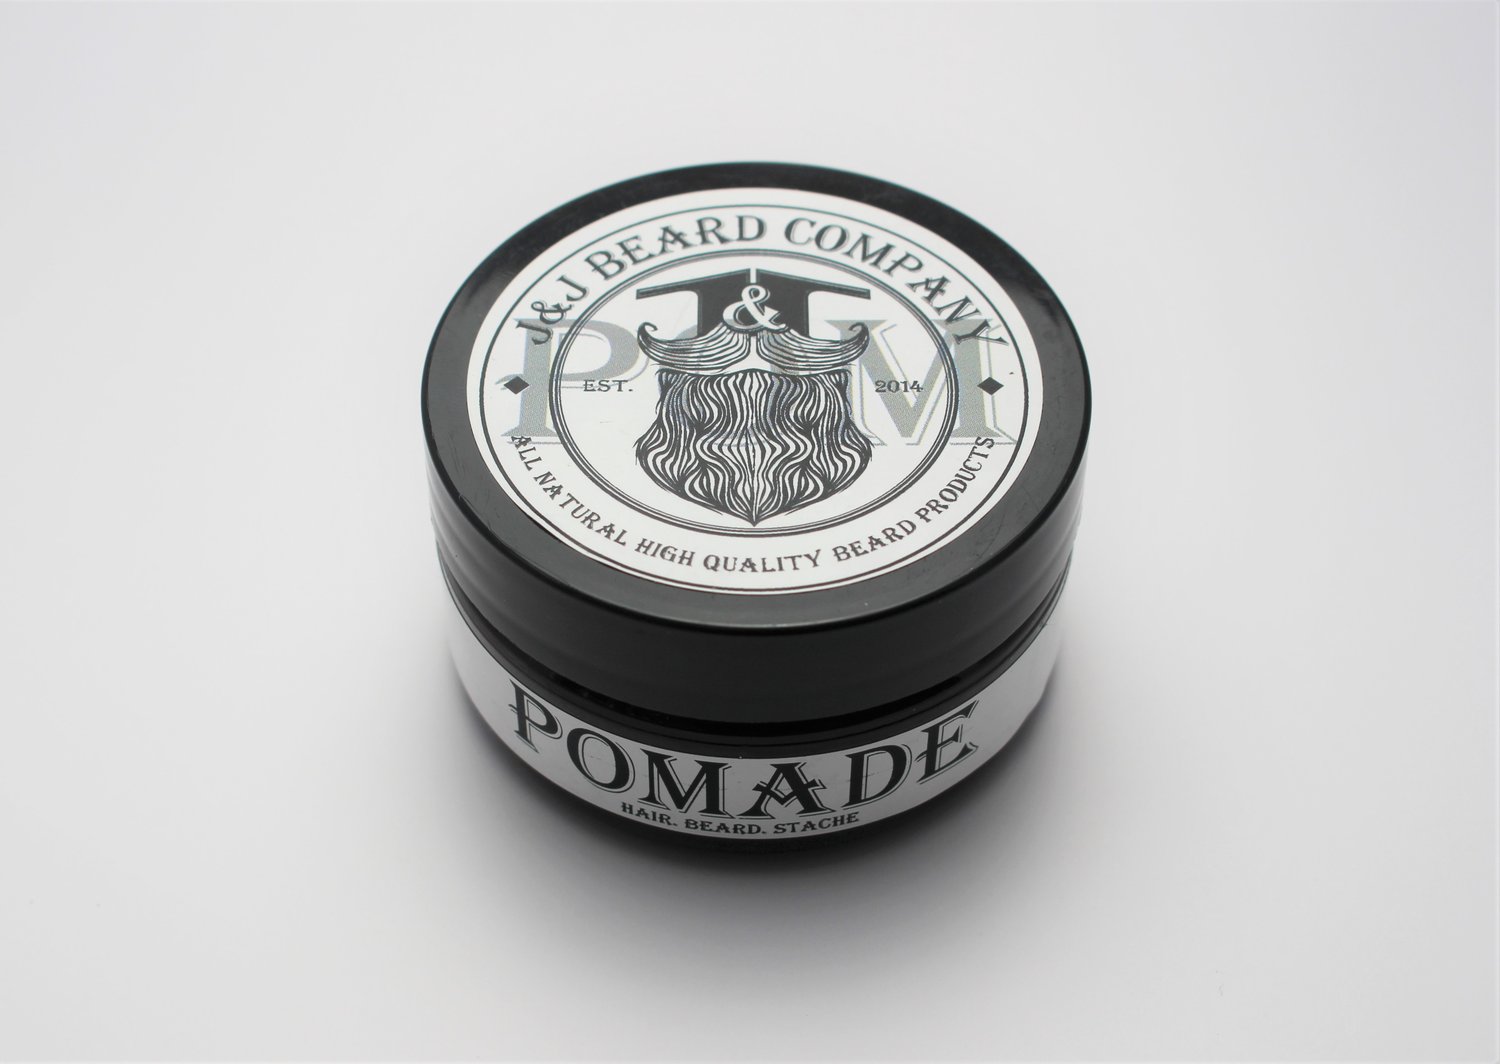 Image of All Natural Pomade